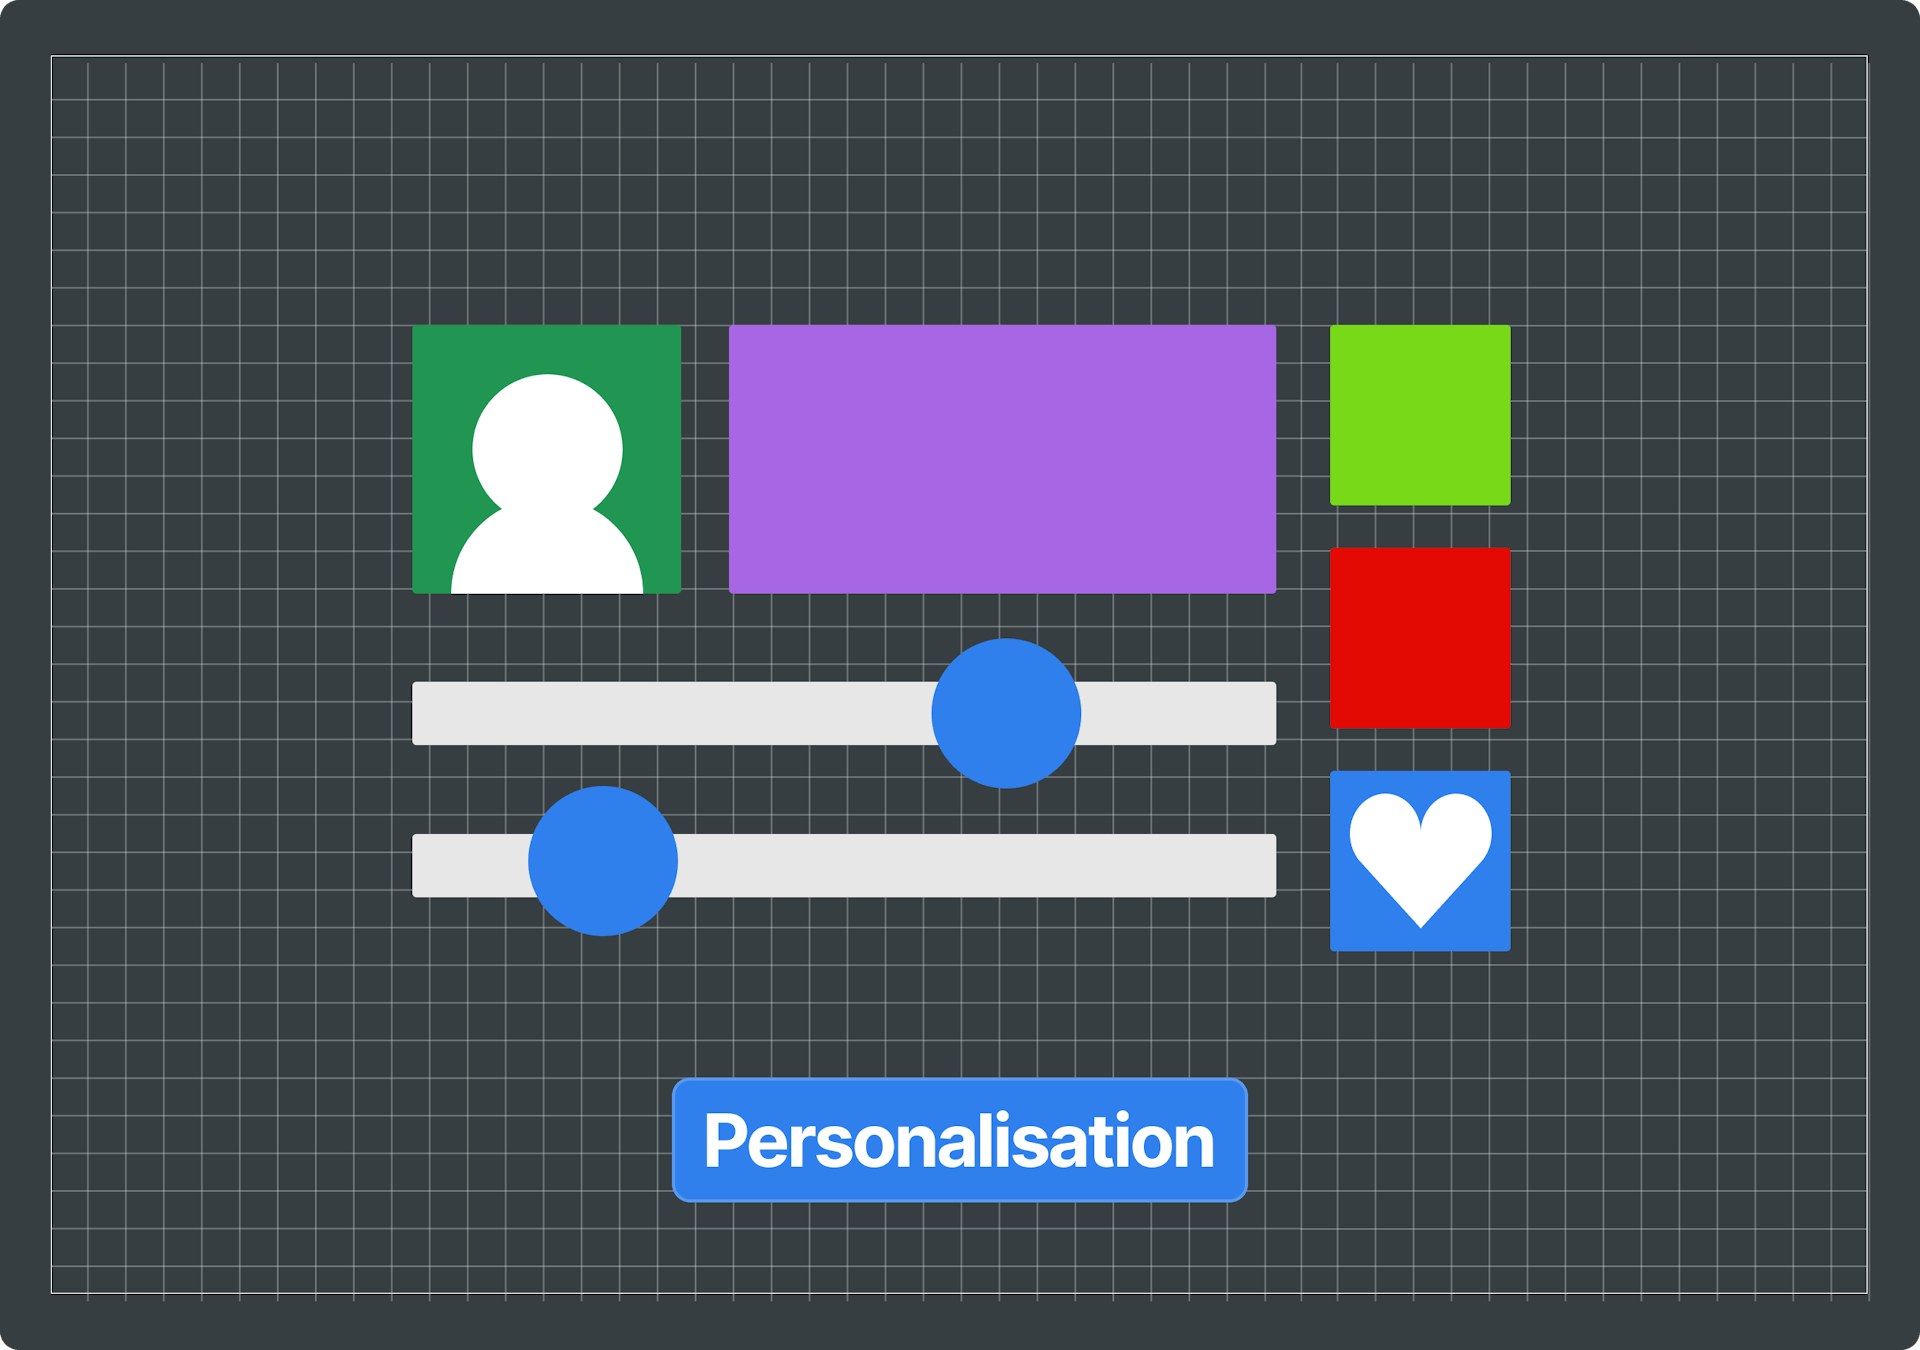 Illustration that shows a character, four different colour blocks - one including a heart, as well as two horizontal lines that represent customisation. Includes text that says "Personalisation".